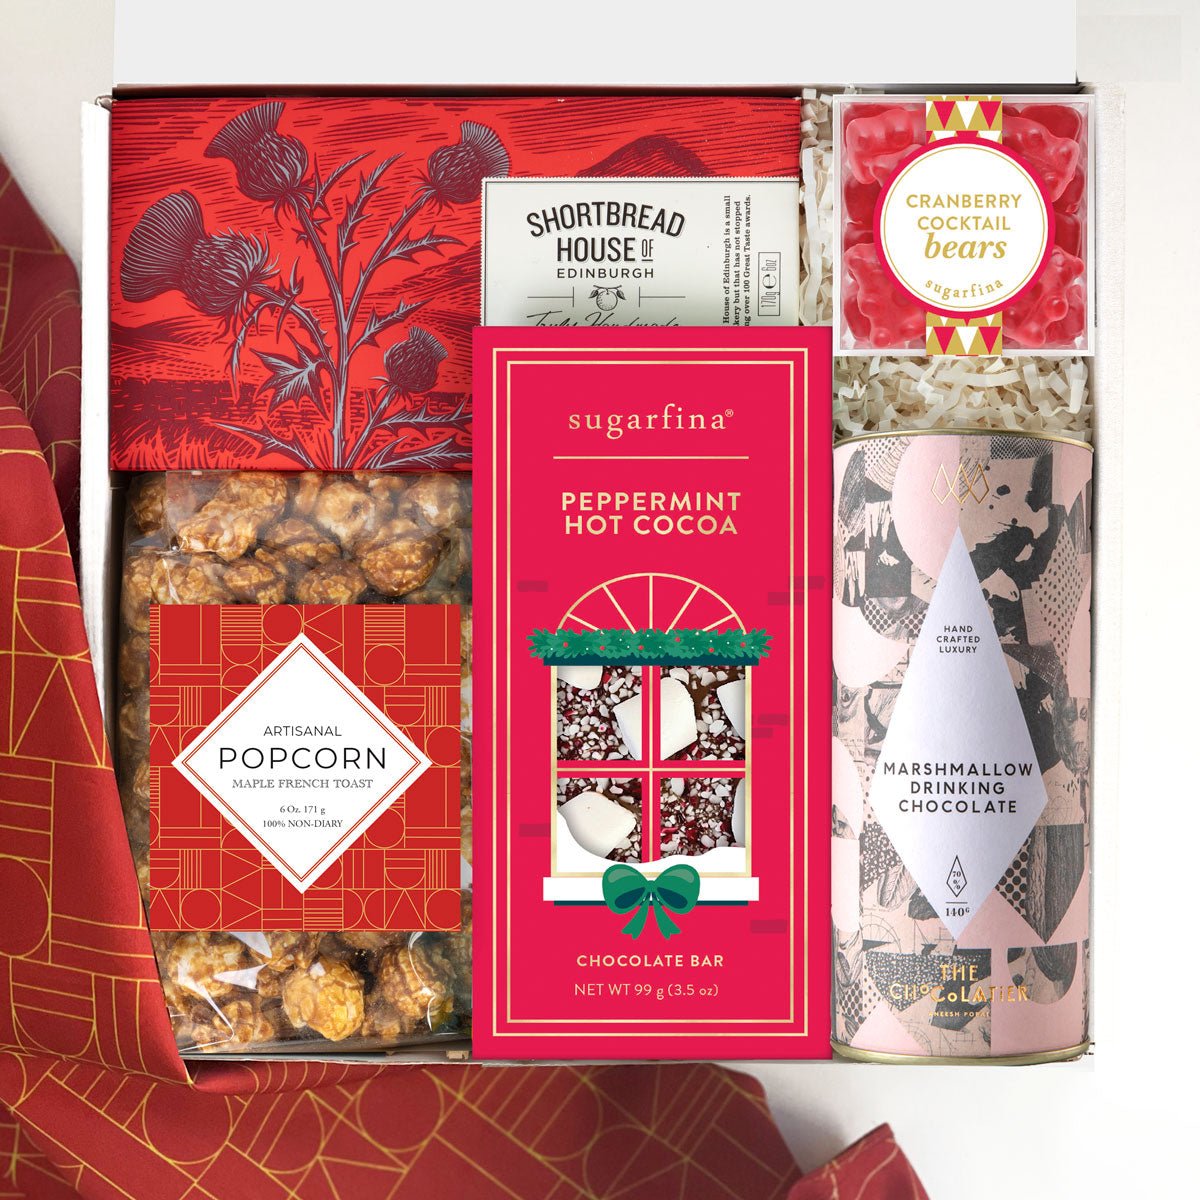 kadoo holiday festive gift box with dark chocolate cookies, gourmet popcorn, peppermint chocolate bar, cranberry cocktail gummy bears, marshmallow hot cocoa.